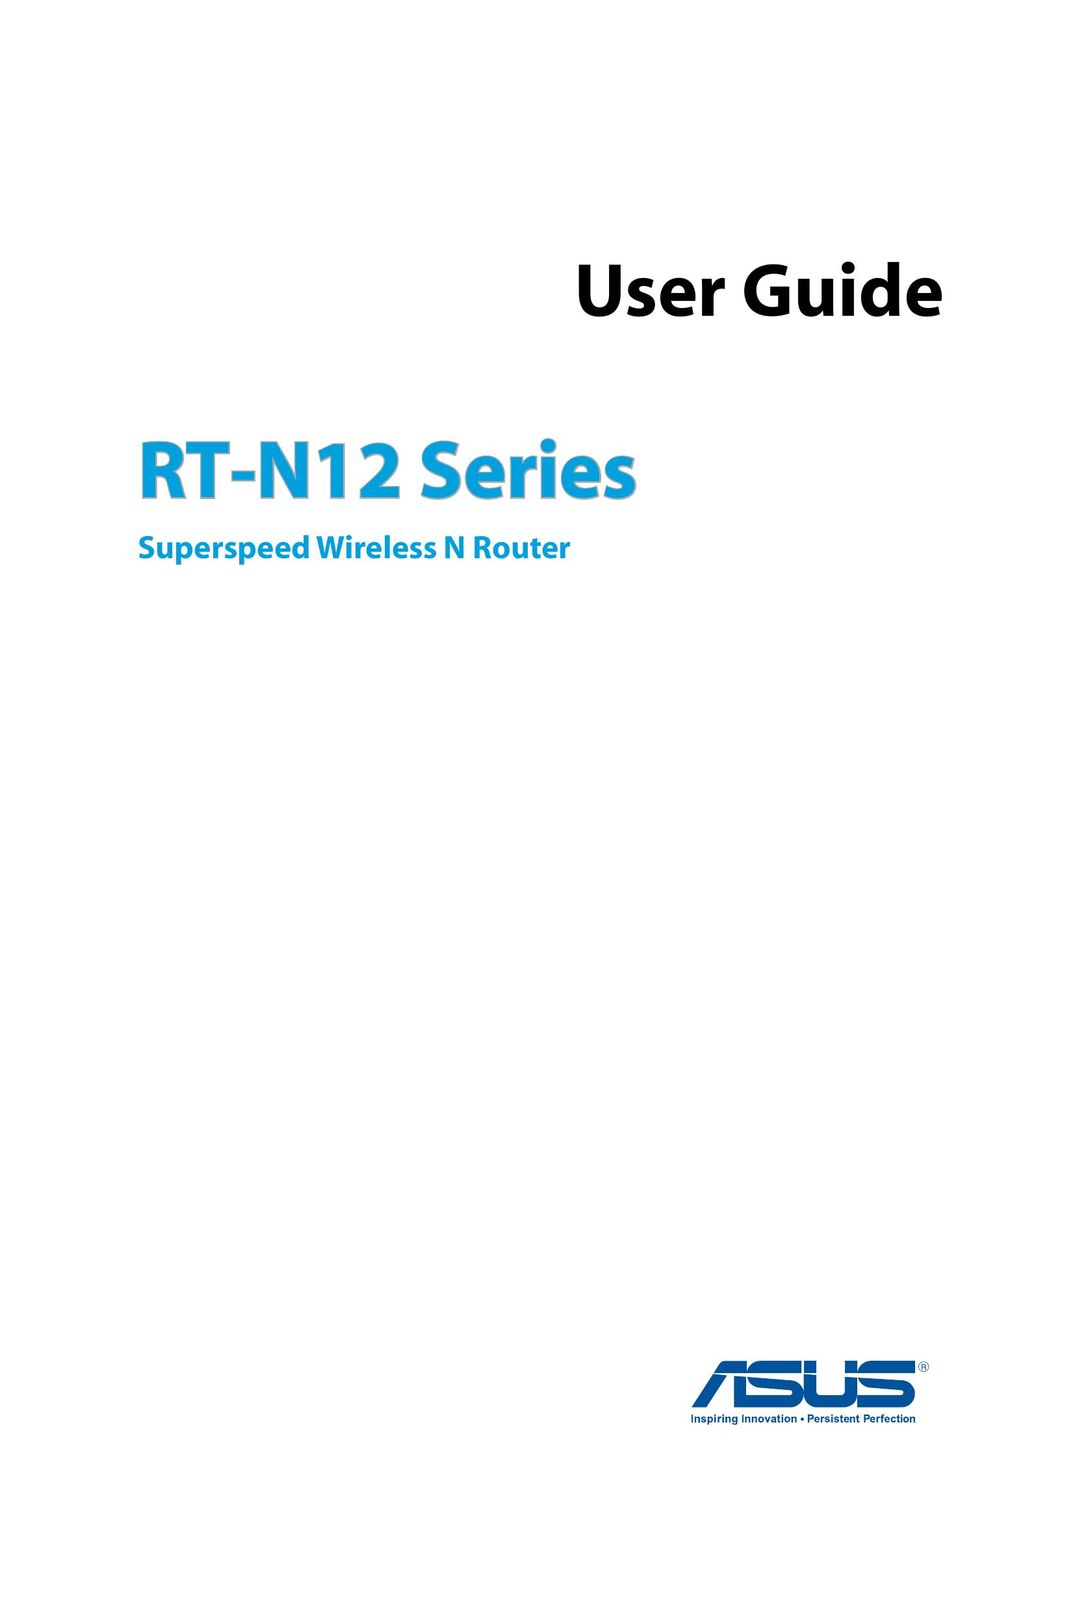 Asus RTN12D1 Network Router User Manual